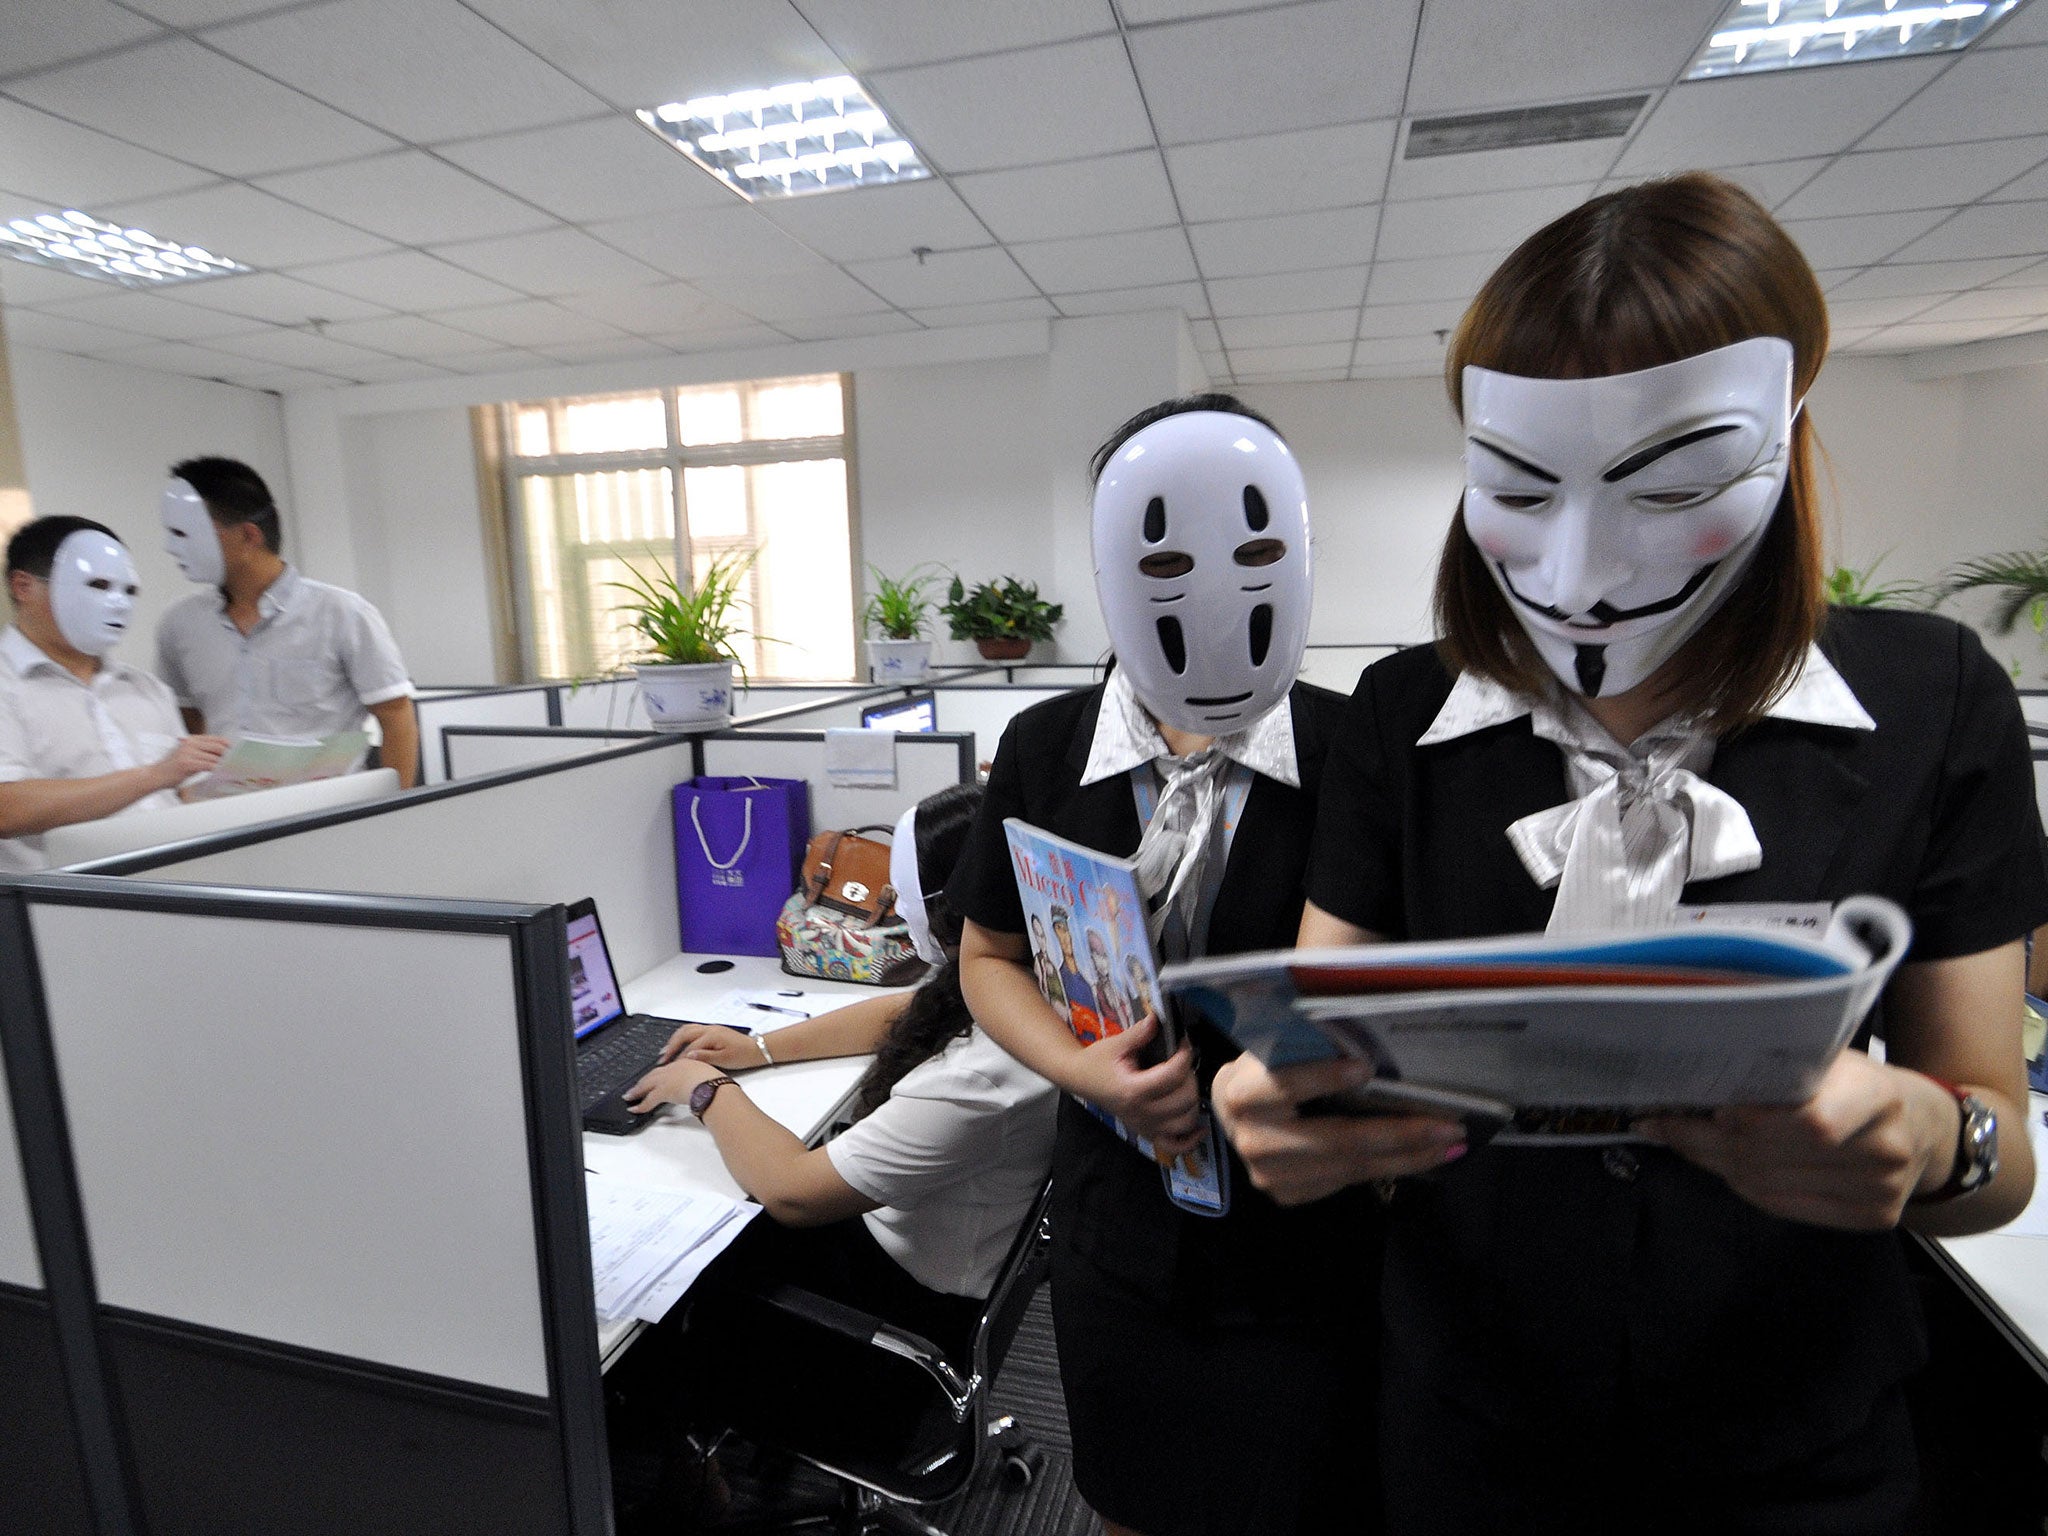 Staff wear No-Face masks during working hours at a service company on July 14, 2015 in Handan, Hebei Province of China. As a service company, its staffs must smile to customers everyday. On 'No-Face Day', the staffs wore No-Face masks to reduce pressure a